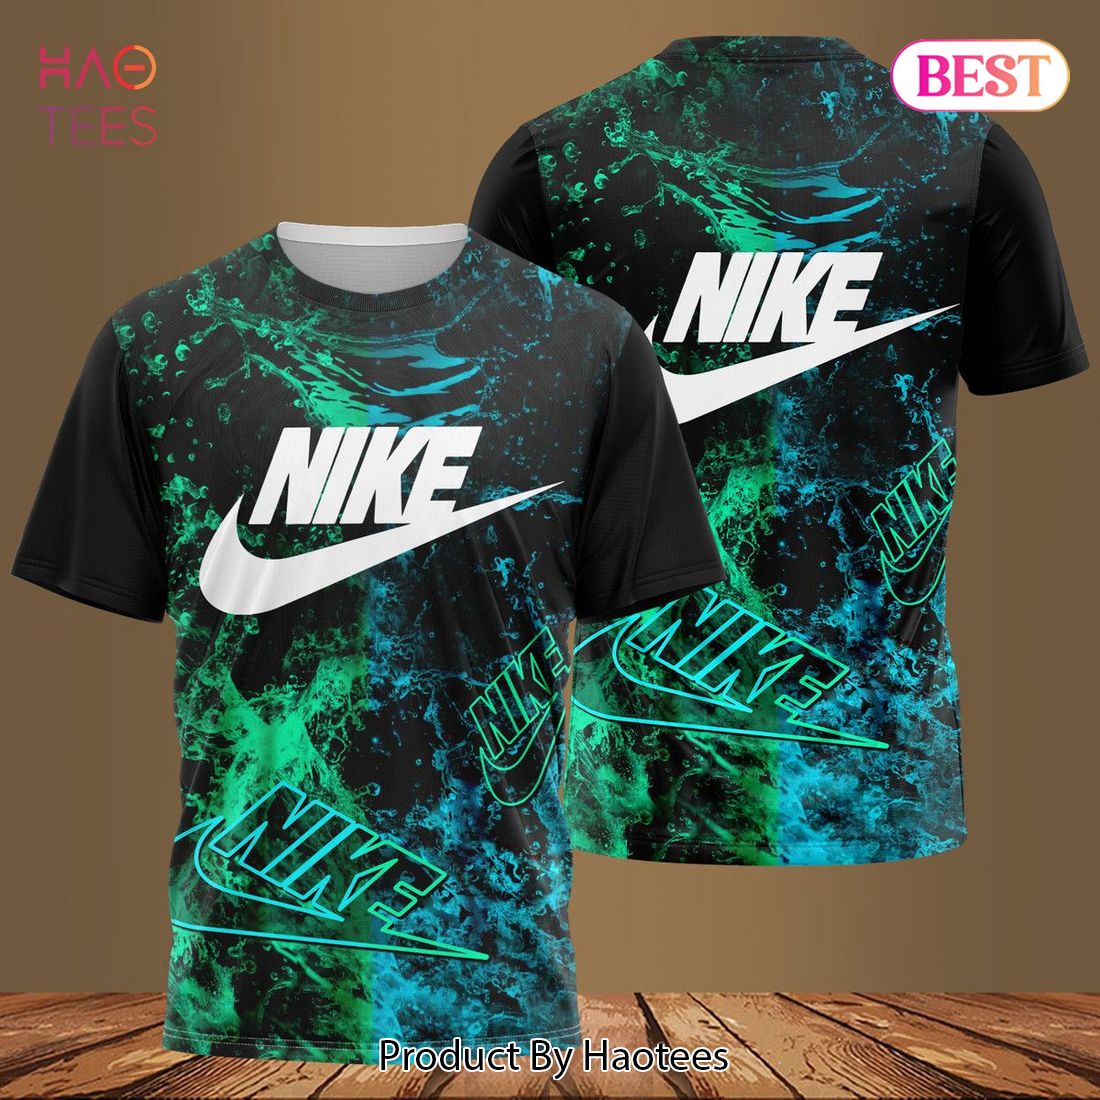 BEST Nike Green Ble Black Luxury Brand 3D T-Shirt Limited Edition